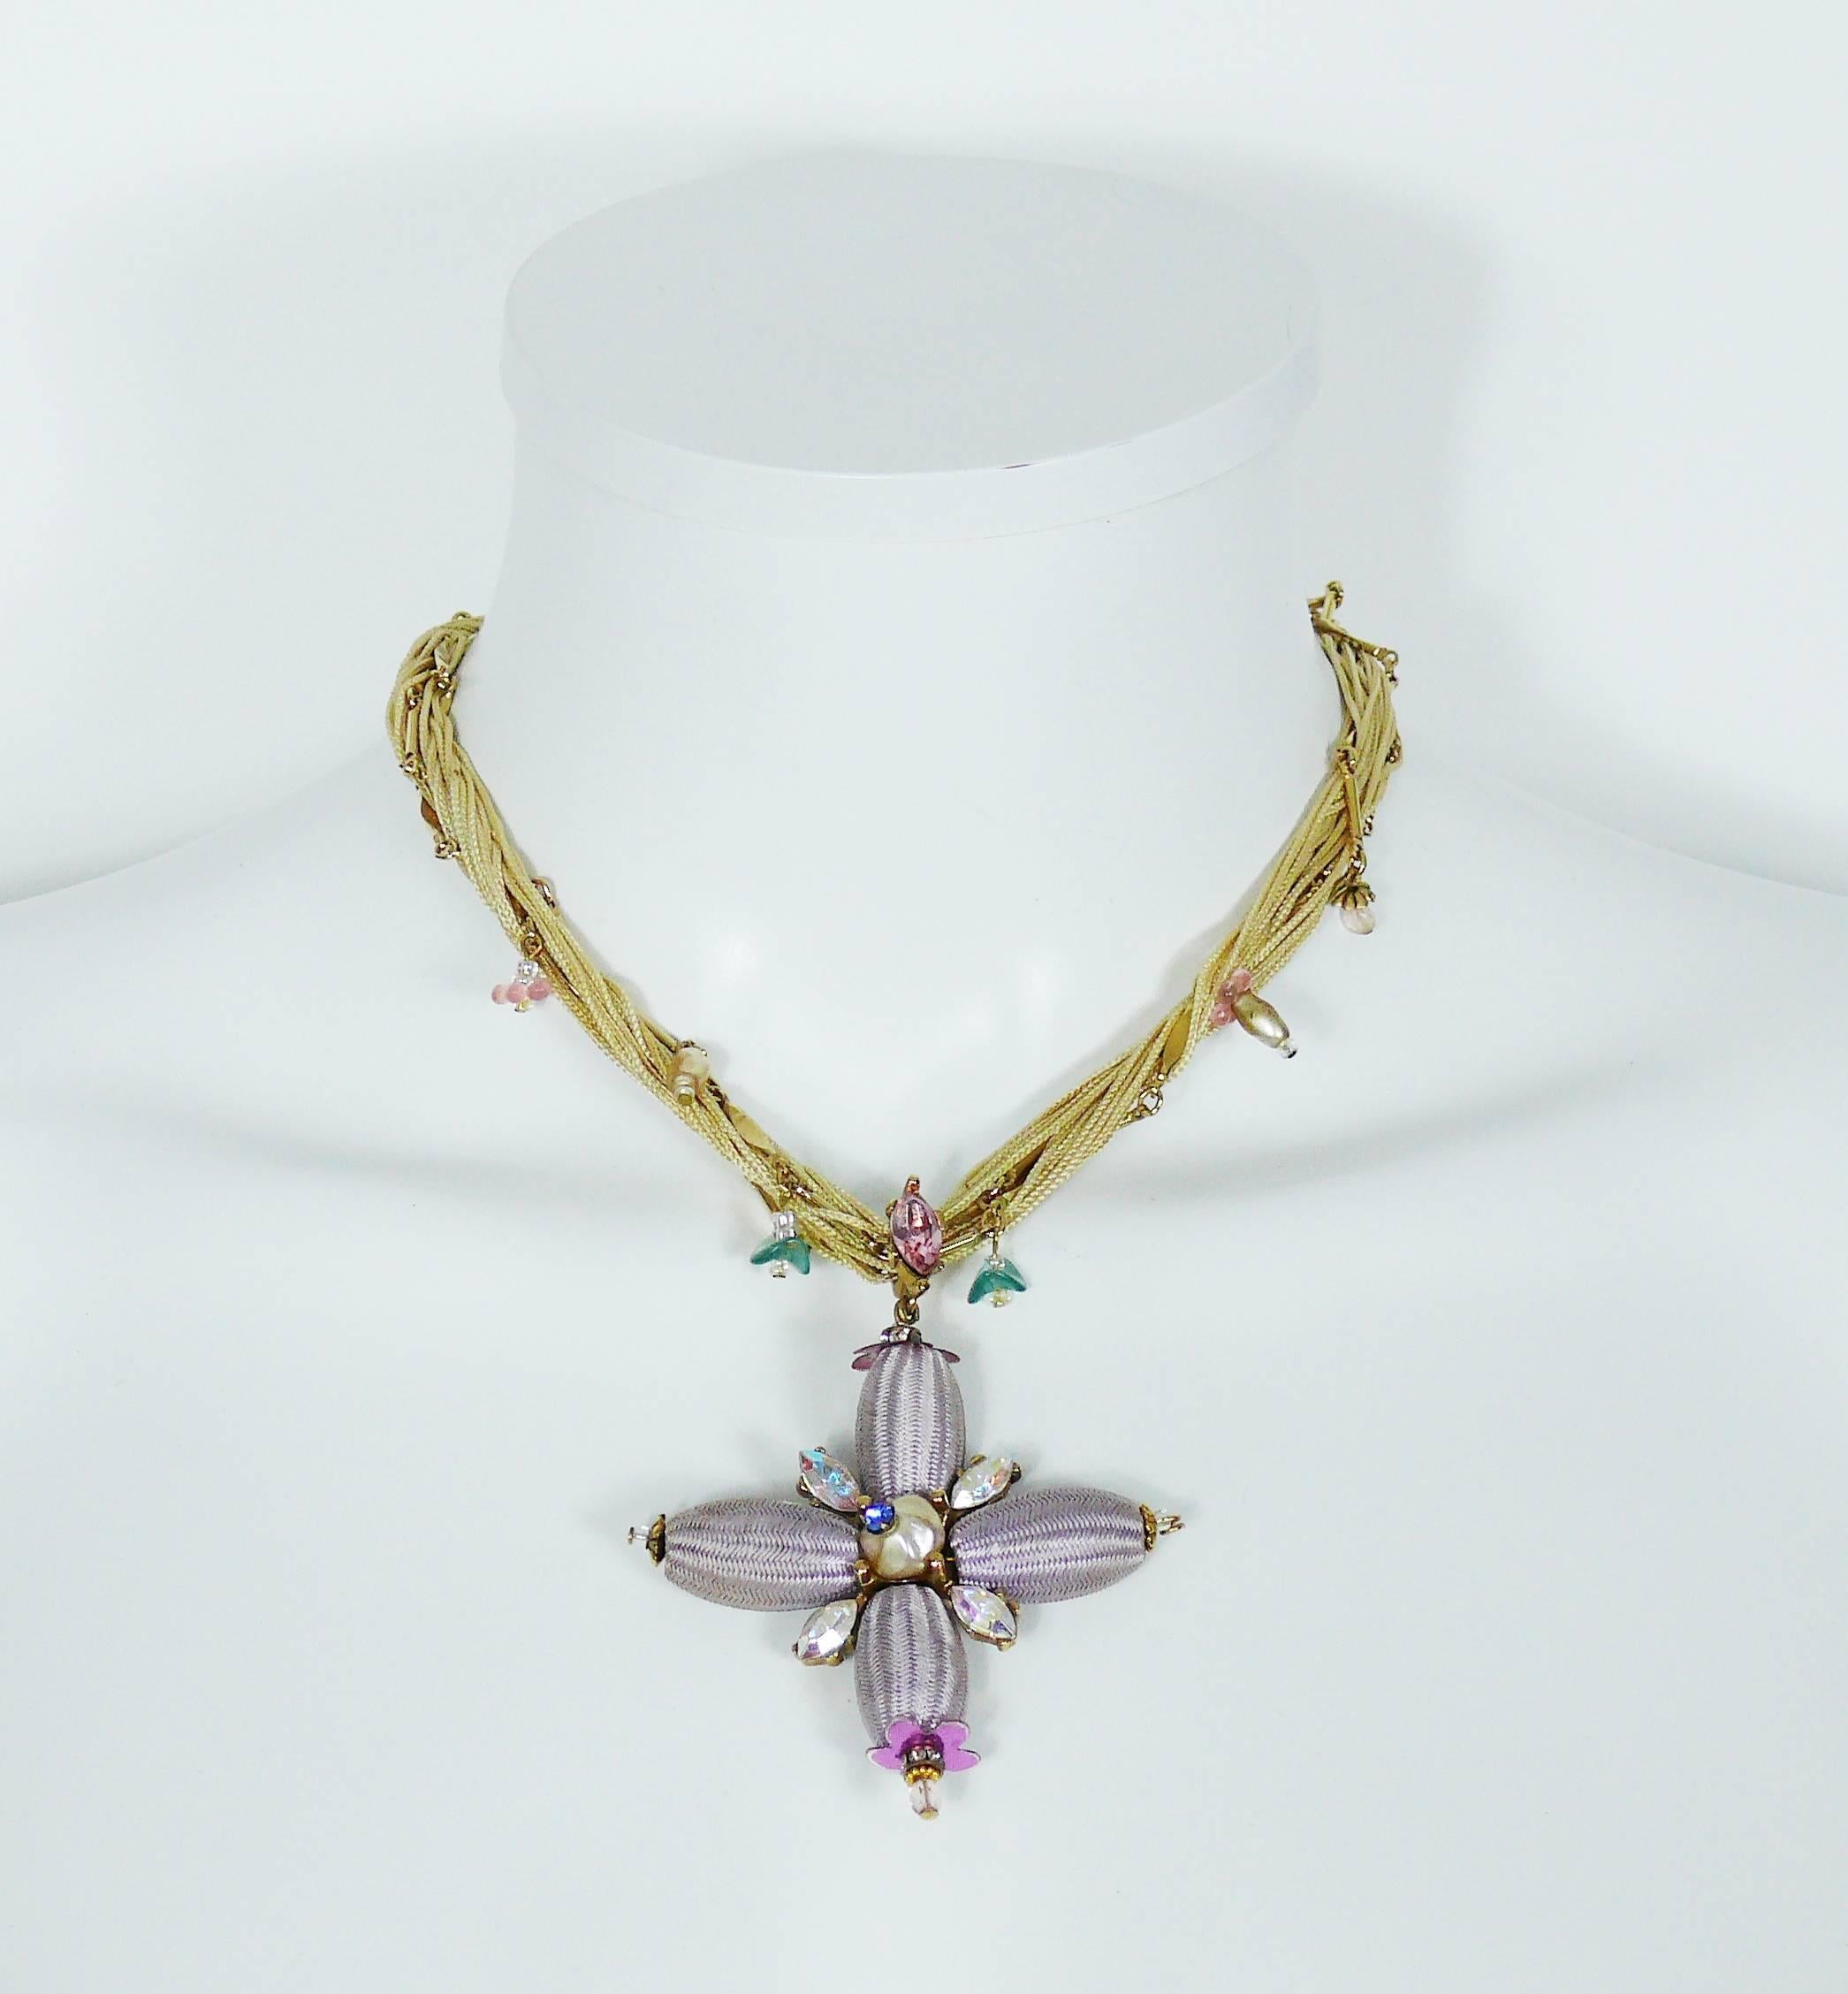 CHRISTIAN LACROIX vintage pendant necklace featuring a beautiful cross made of olive shaped woven silk branches embellished with faux pearl and multicolored crystals. 

Off white silk cord rope interweaved with gold tone chain and charms.

Lobster